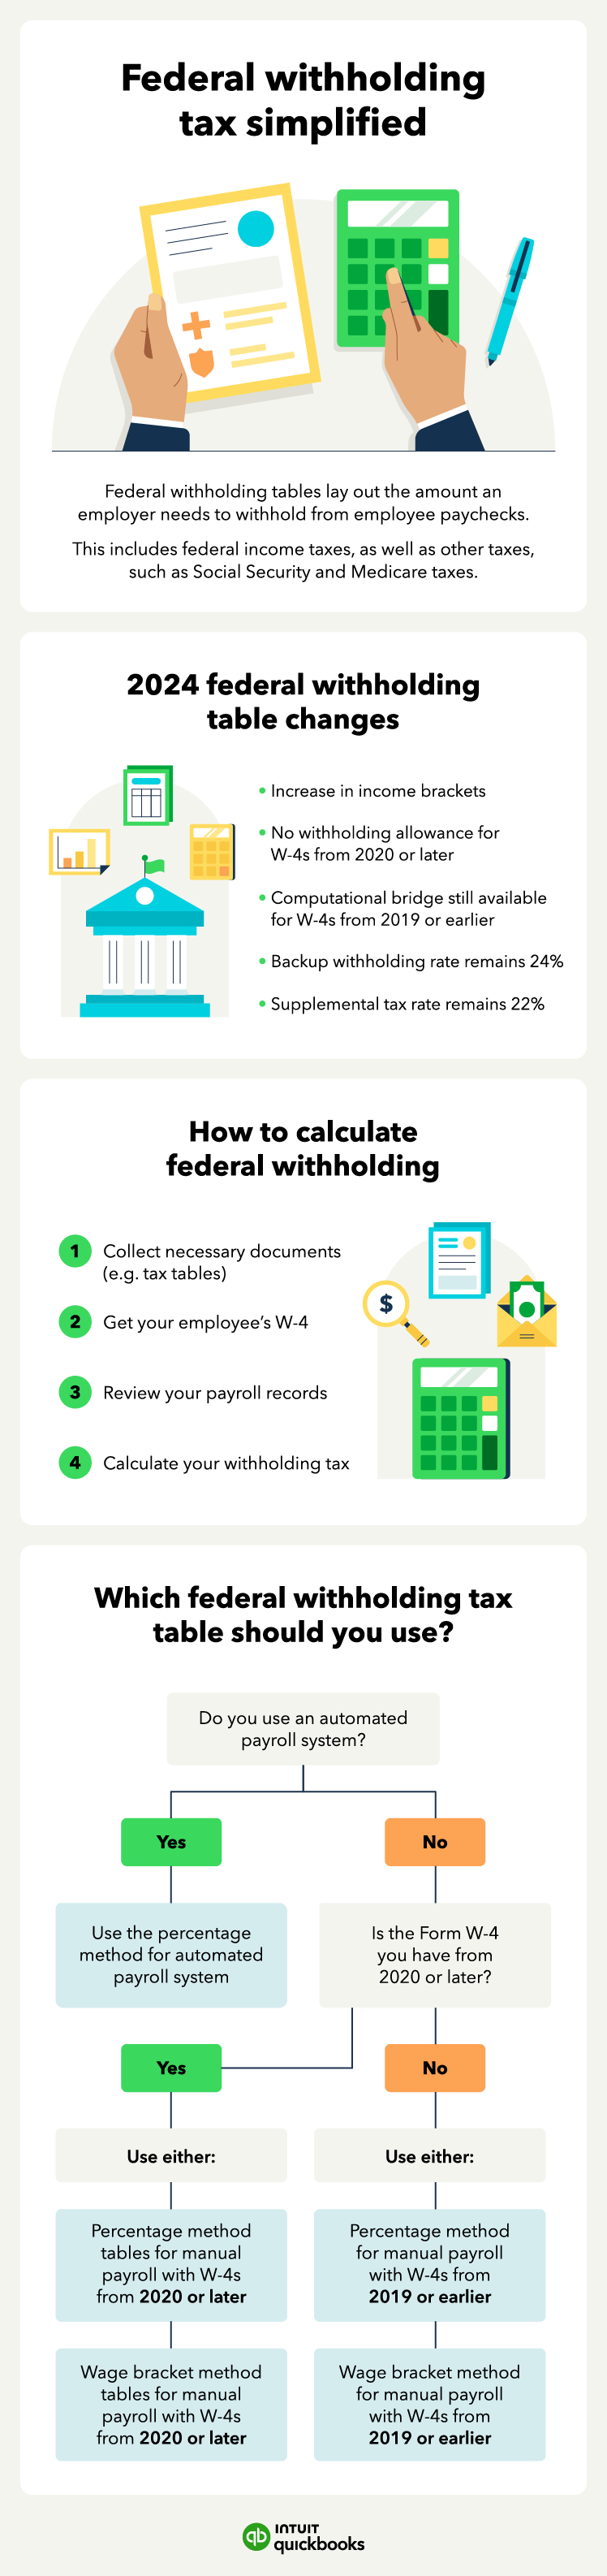 An illustration of what federal withholding tax tables are and how to use them.